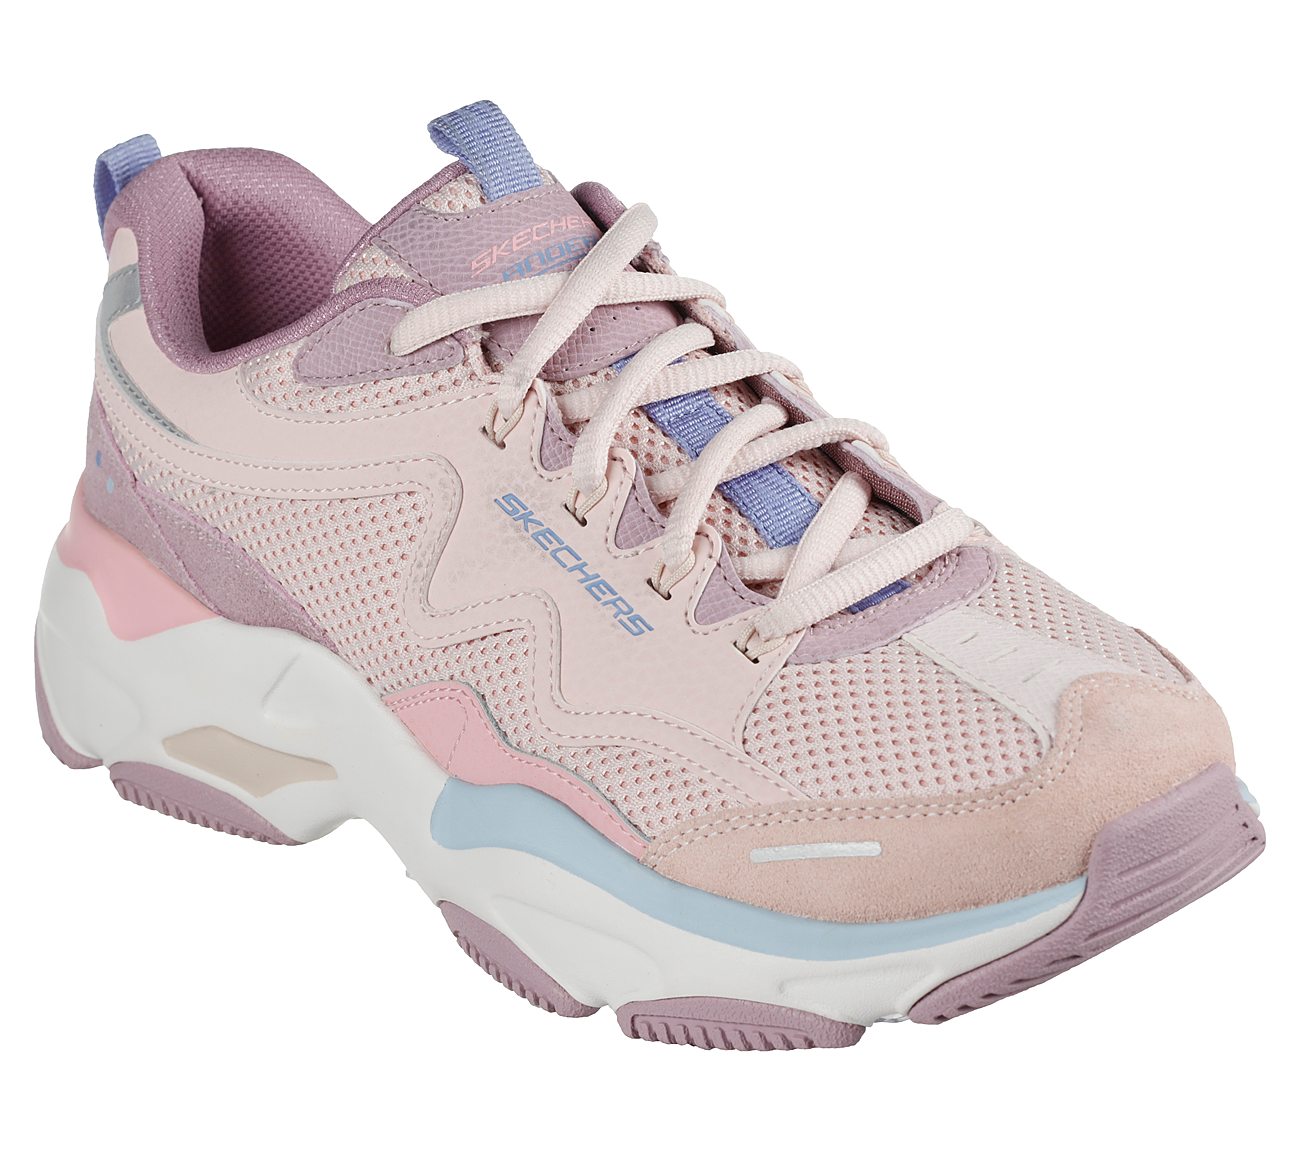 CHUNKY FASHION 1, PINK/LAVENDER Footwear Lateral View